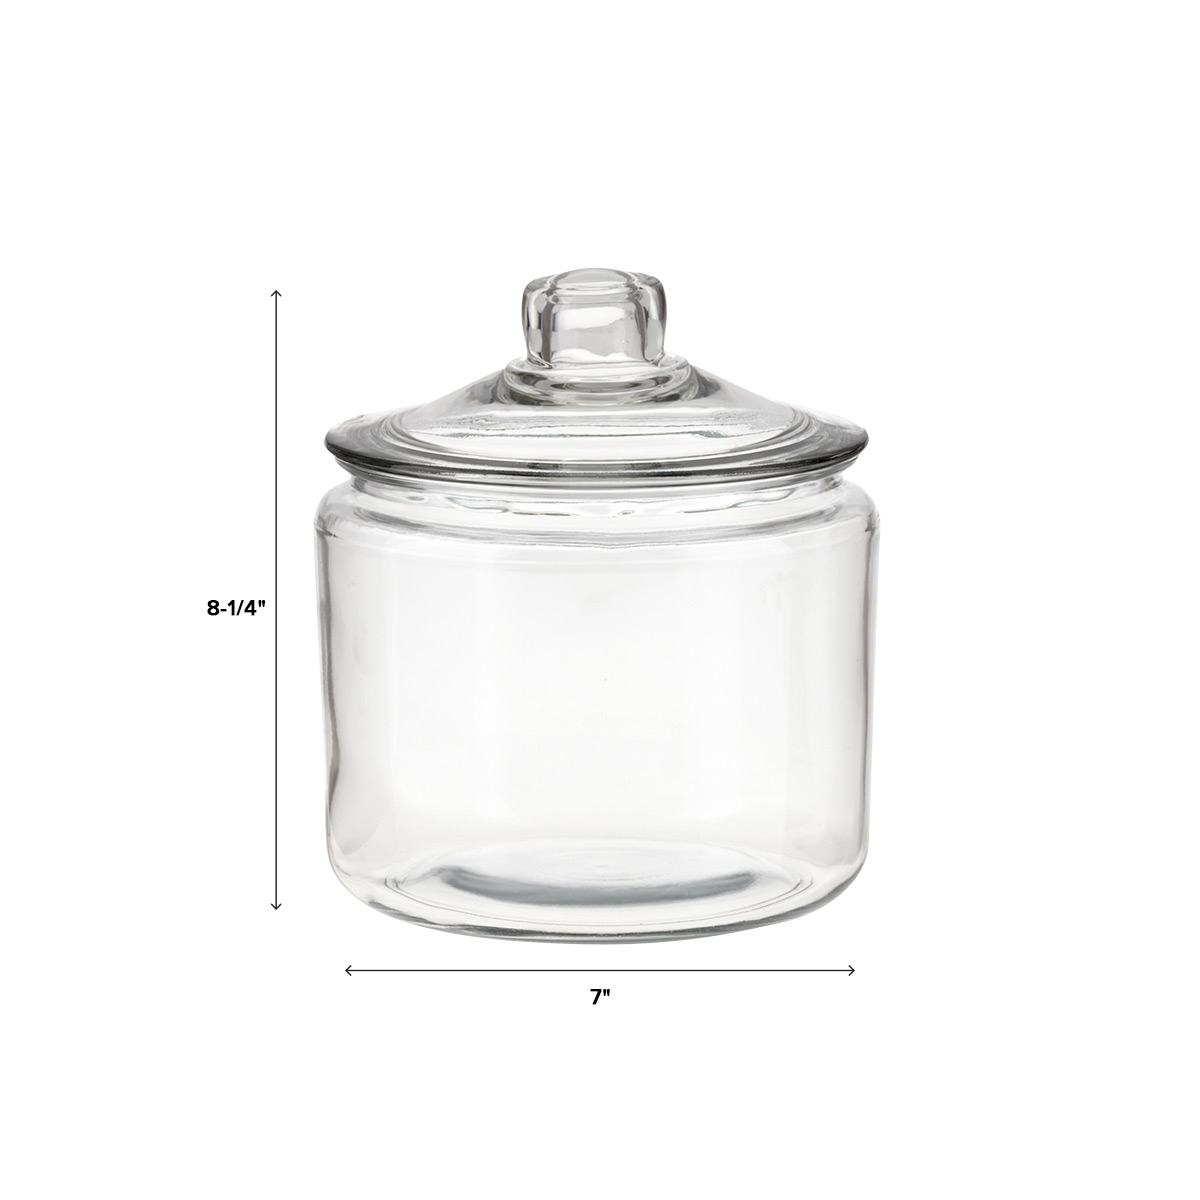 Anchor Hocking Glass Heritage Hill Jar with Glass Cover, Clear, 3 qt